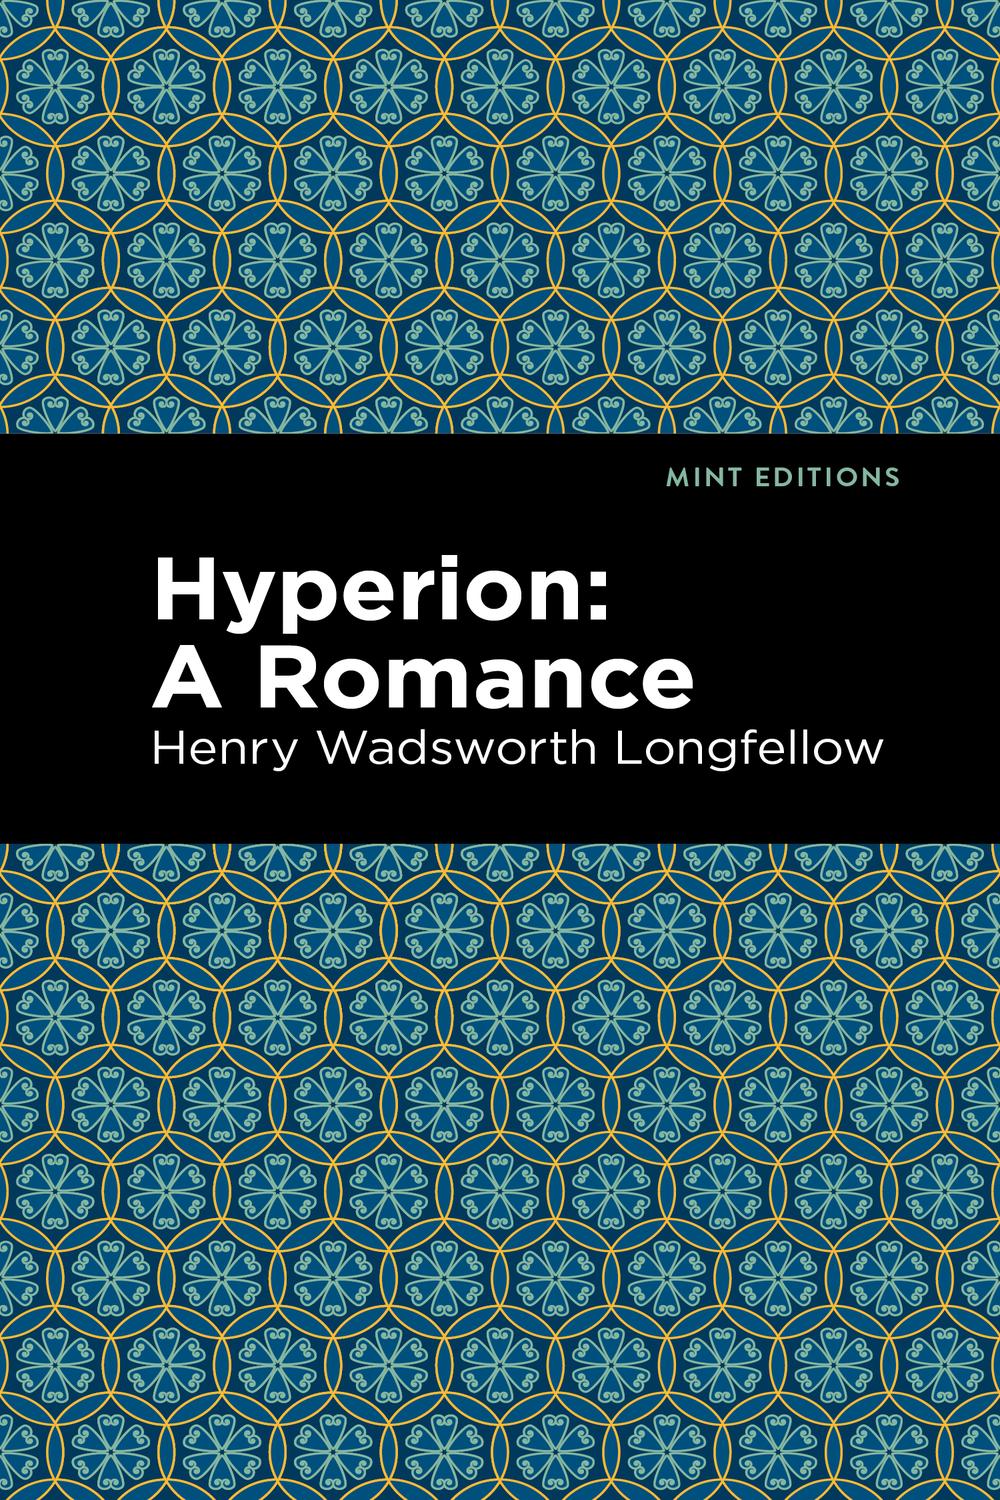 Hyperion - Henry Wadsworth Longfellow,,